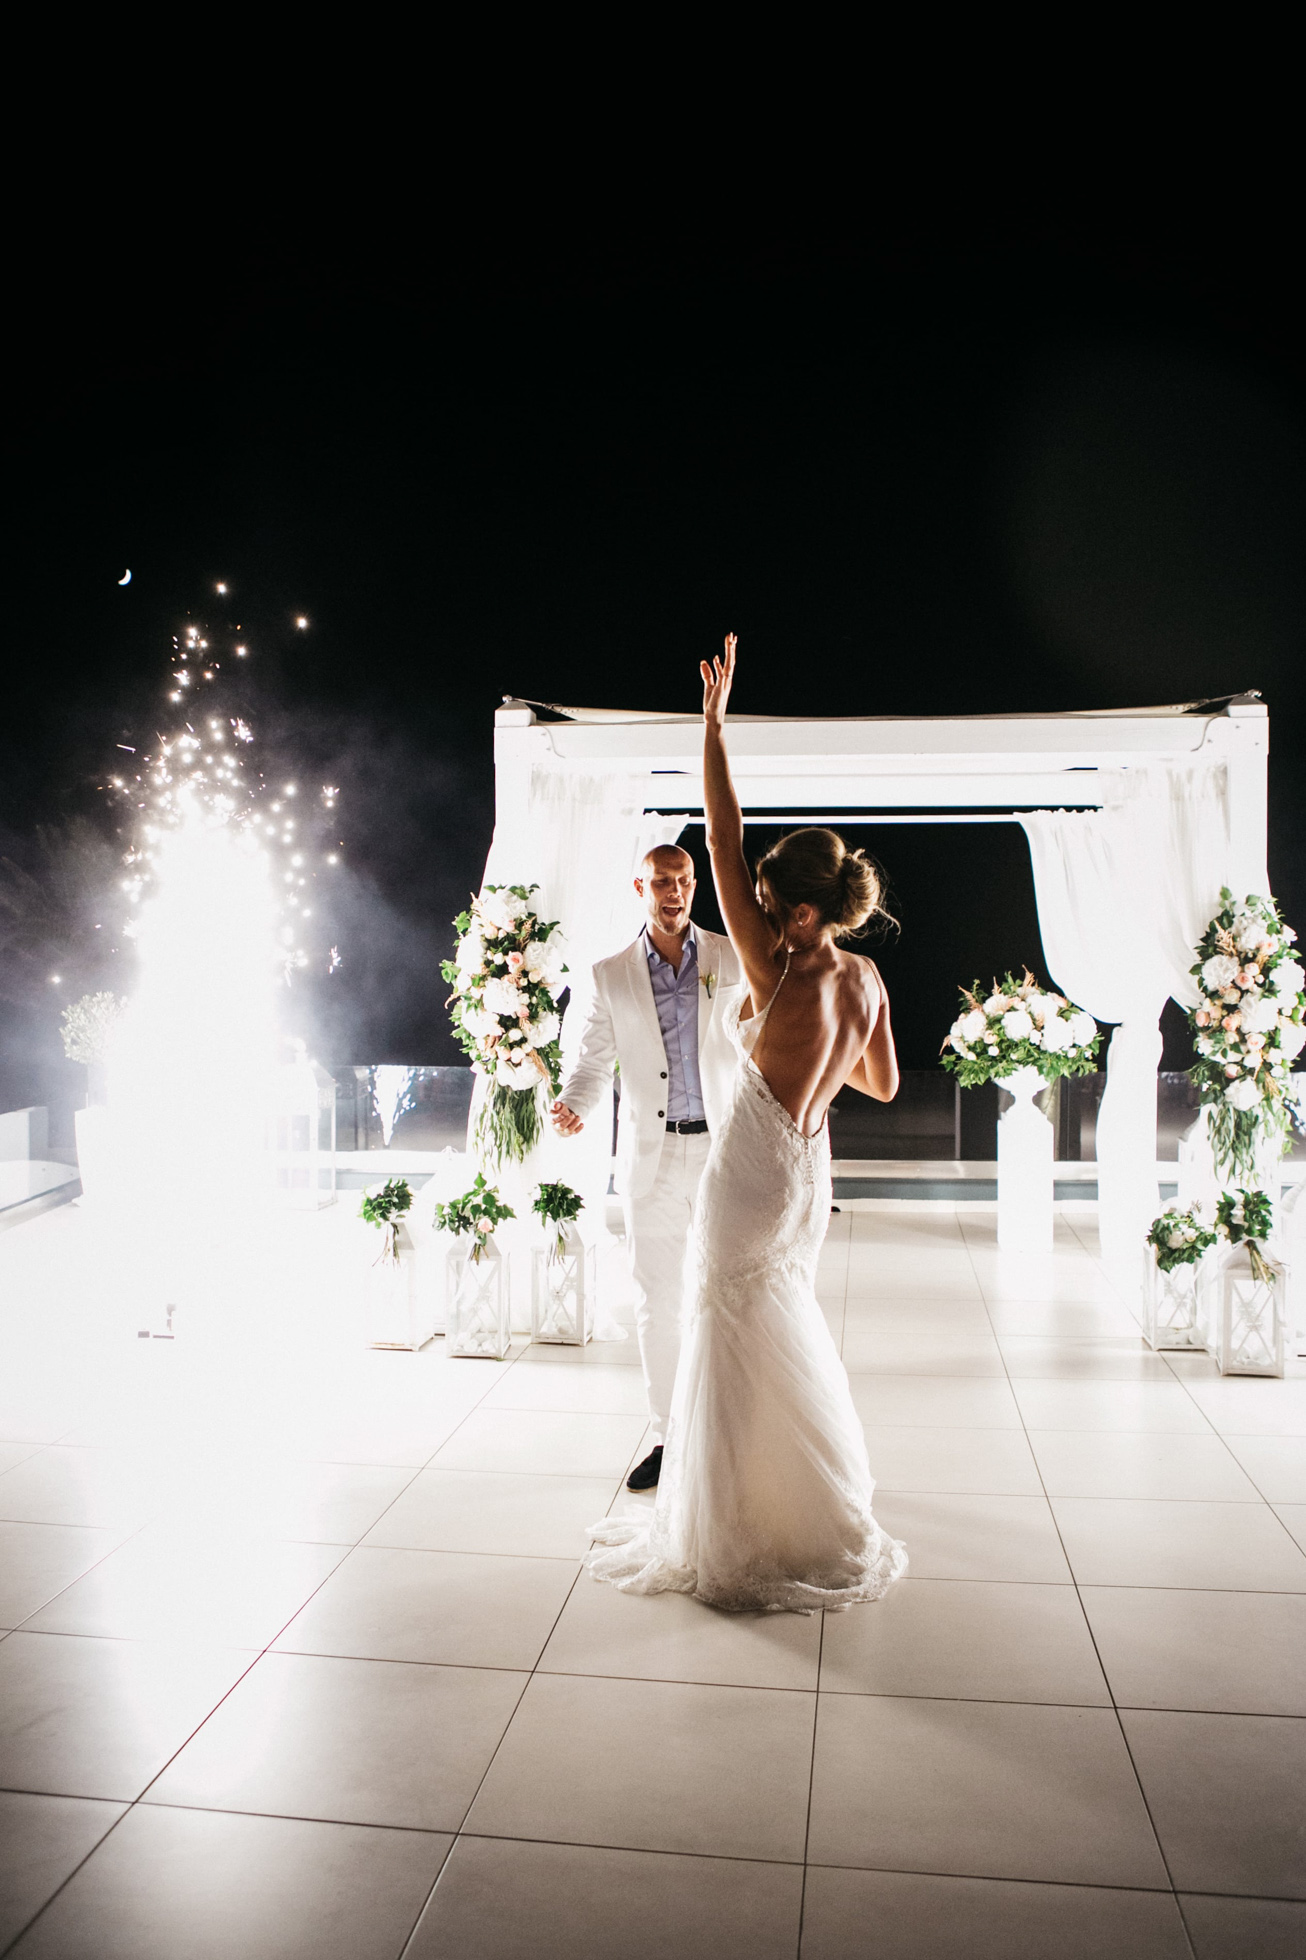 Bride and groom's first dance during their wedding reception at Le Ciel wedding estate in Santorini island, Greece.